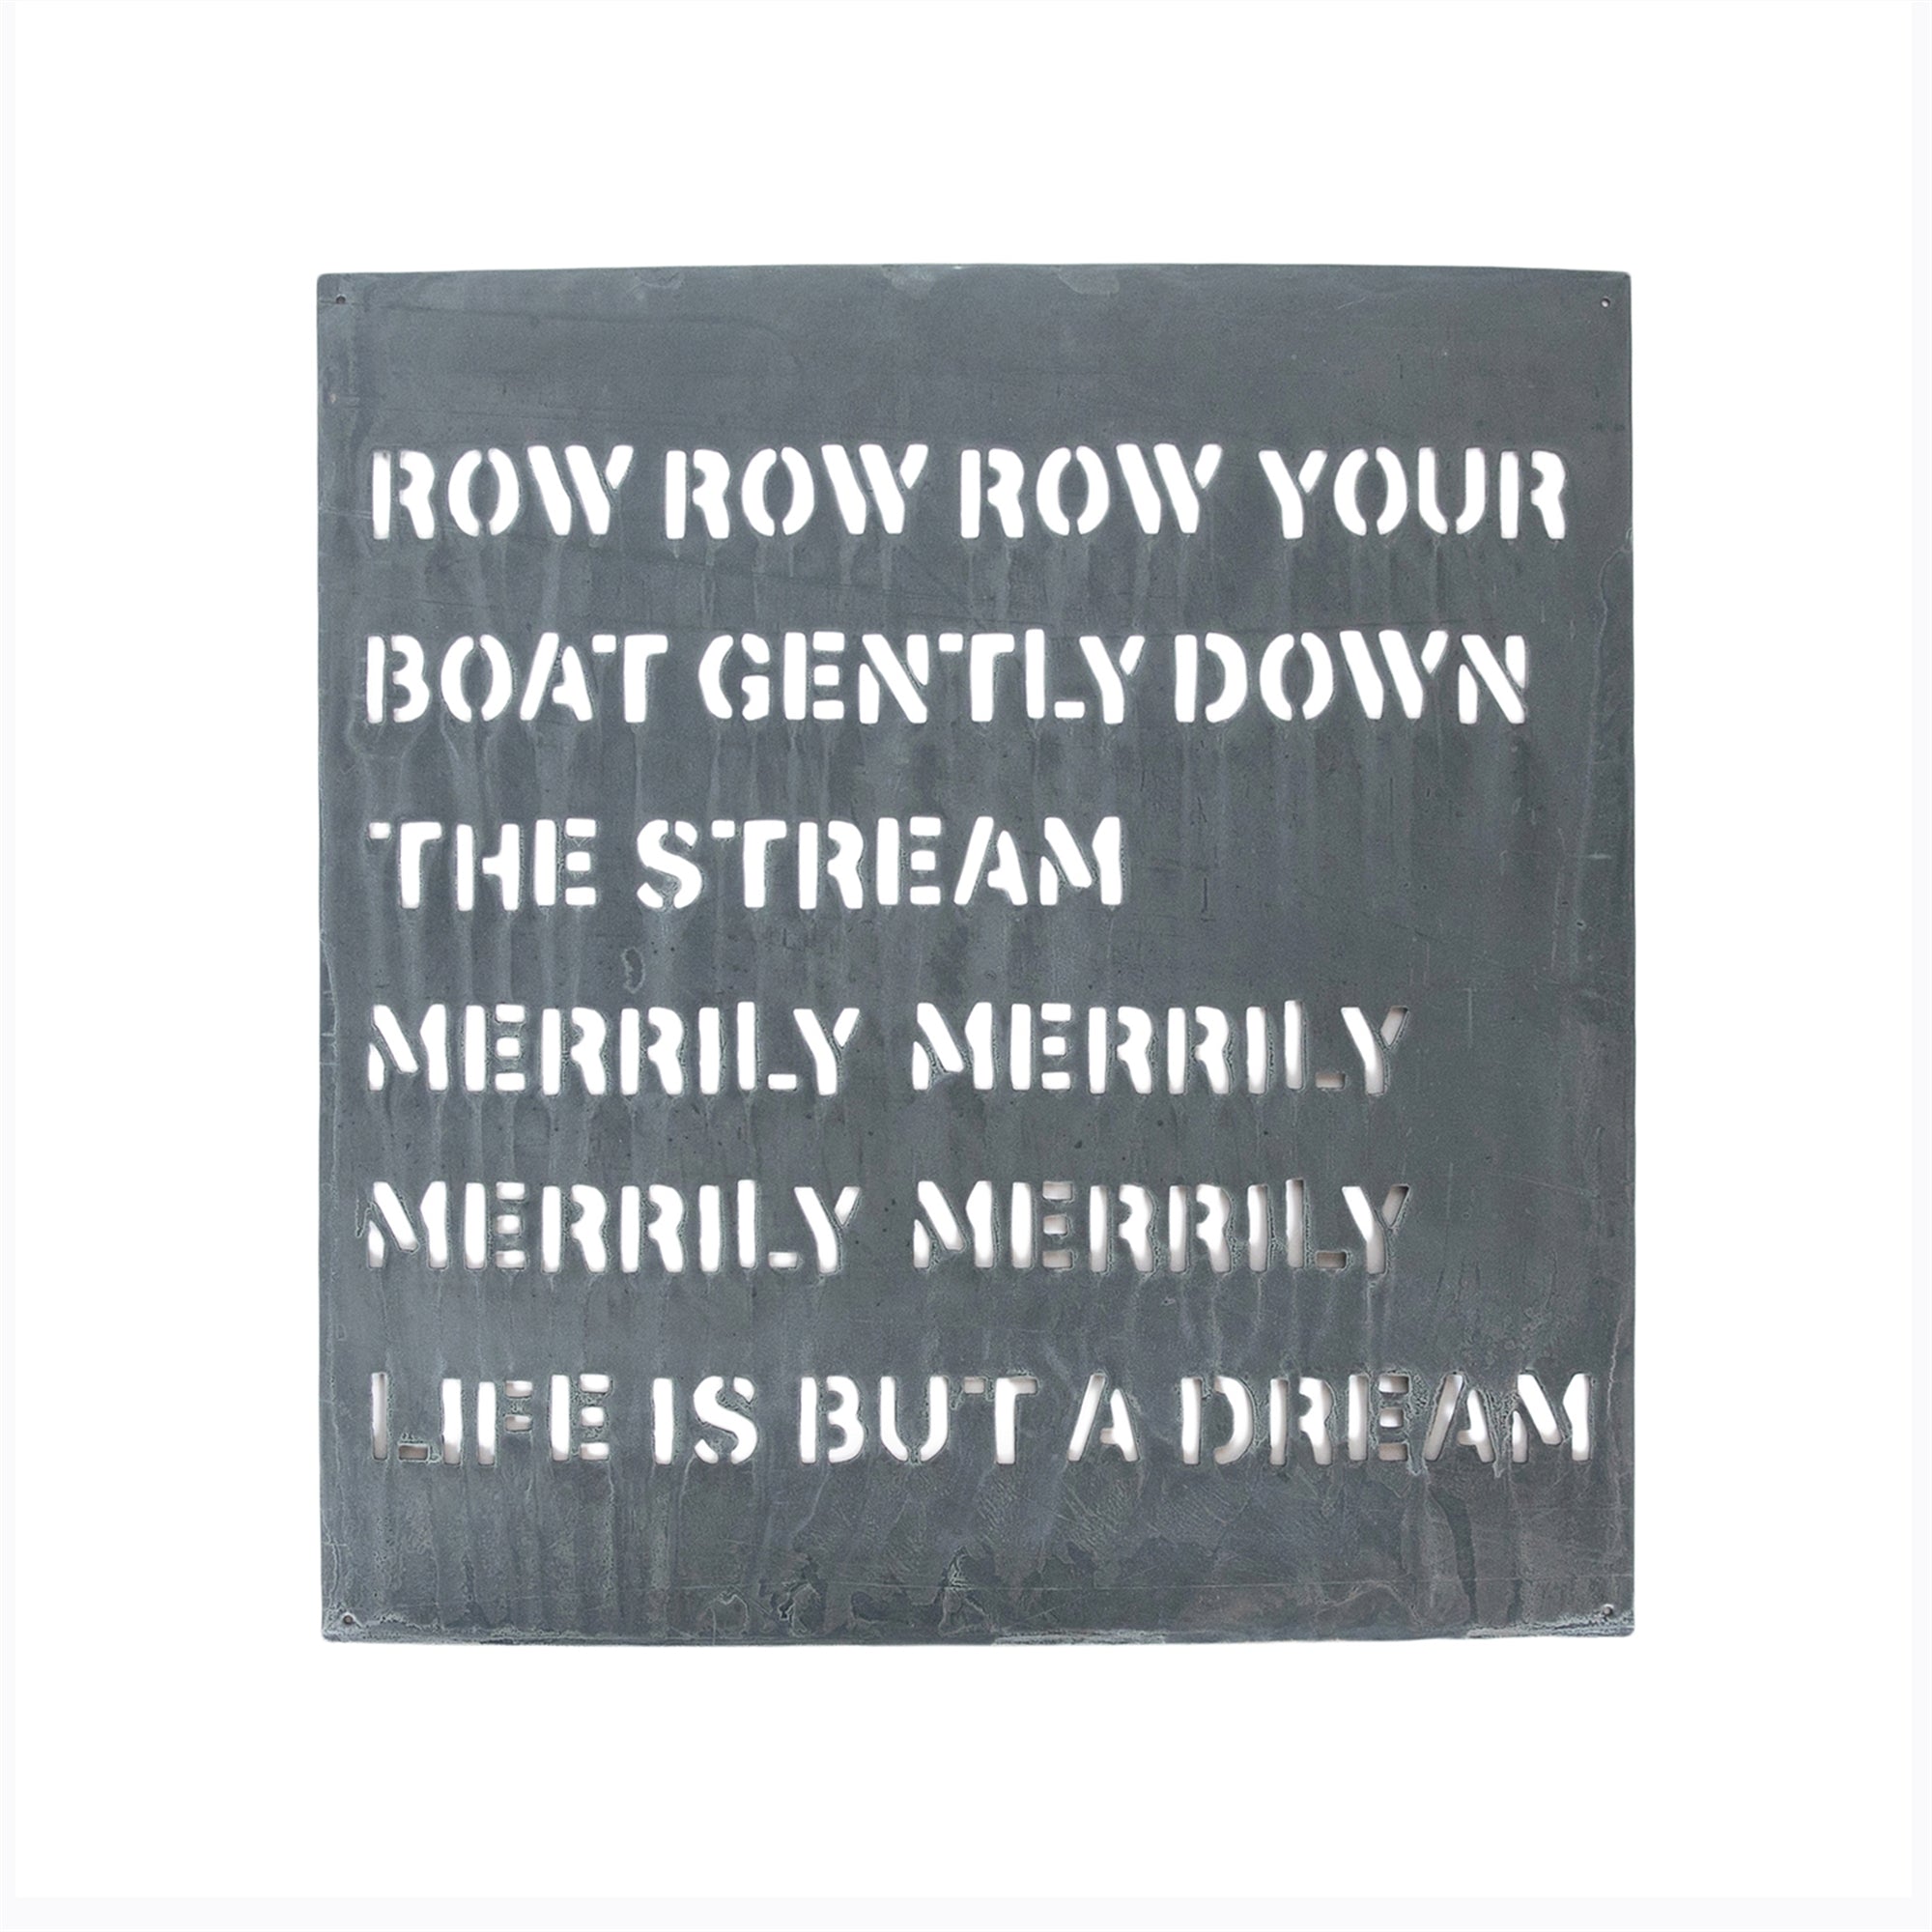 Image of Sugarboo & Co metal sign entitled row row row your boat with the words row row row your boat gently down the stream merrily merrily merrily life is but a dream